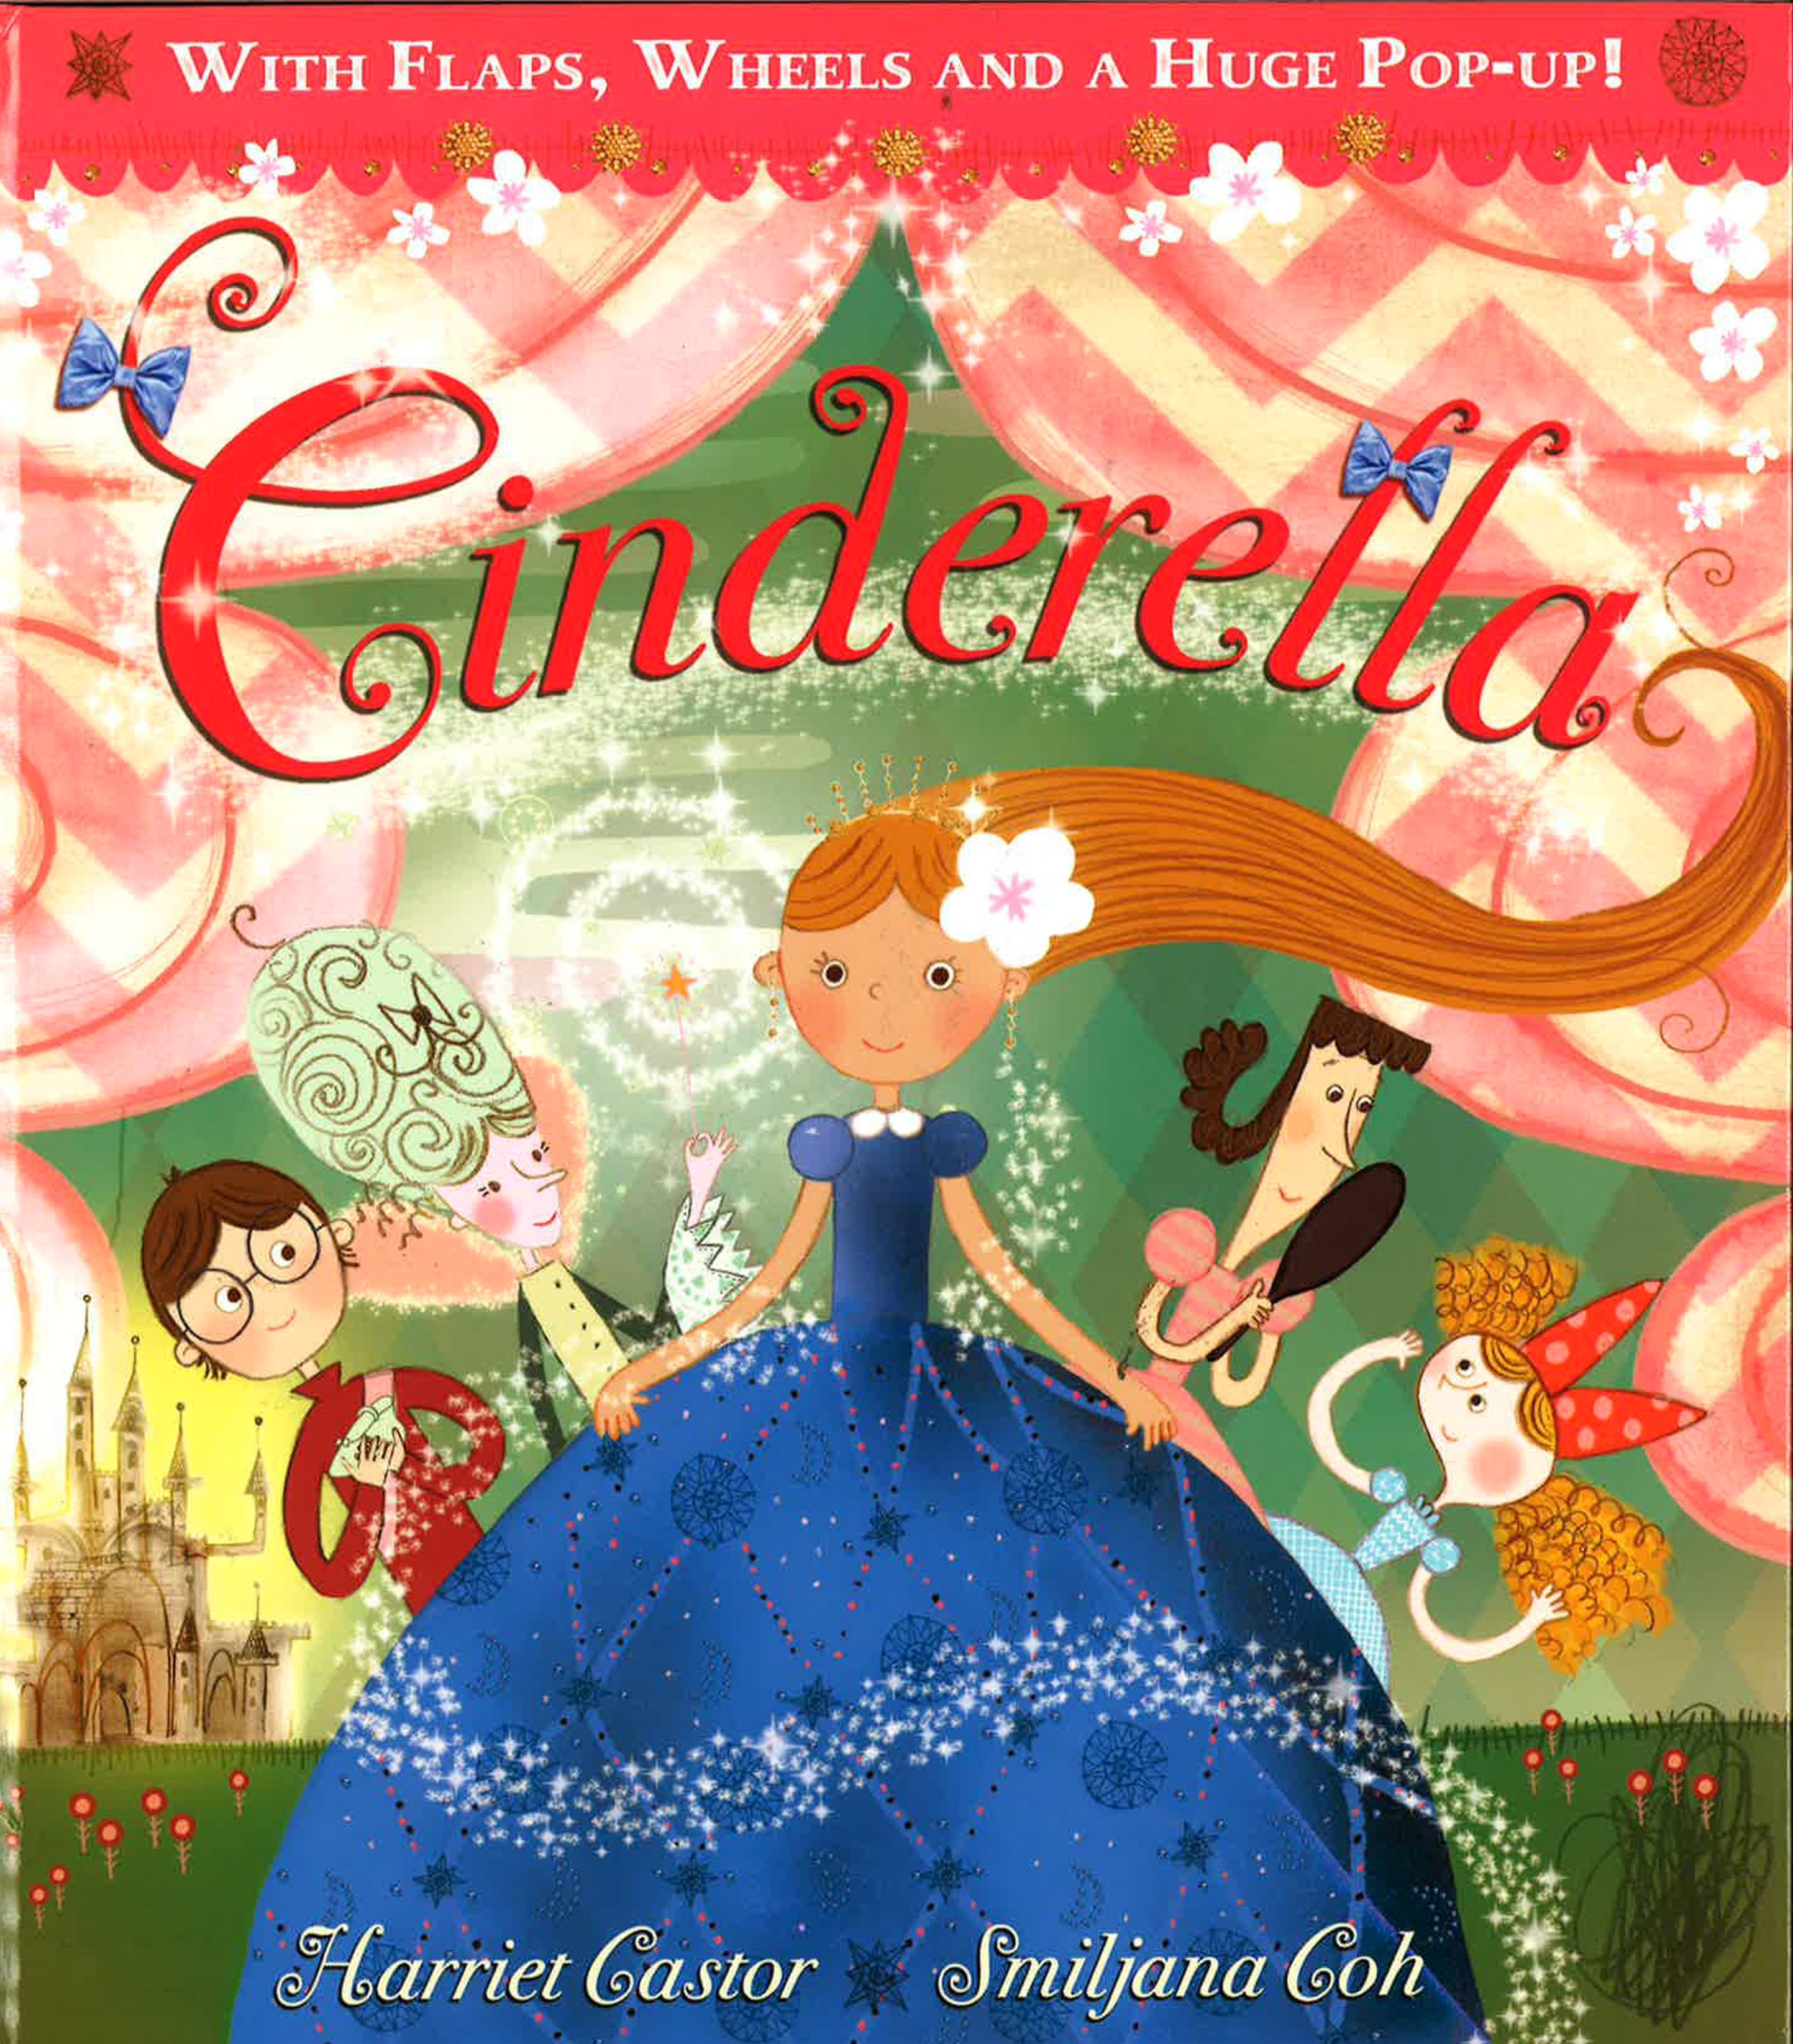 Wheels　BookXcess　Cinderella　A　And　Huge　Pop-Up!　–　With　Flaps,